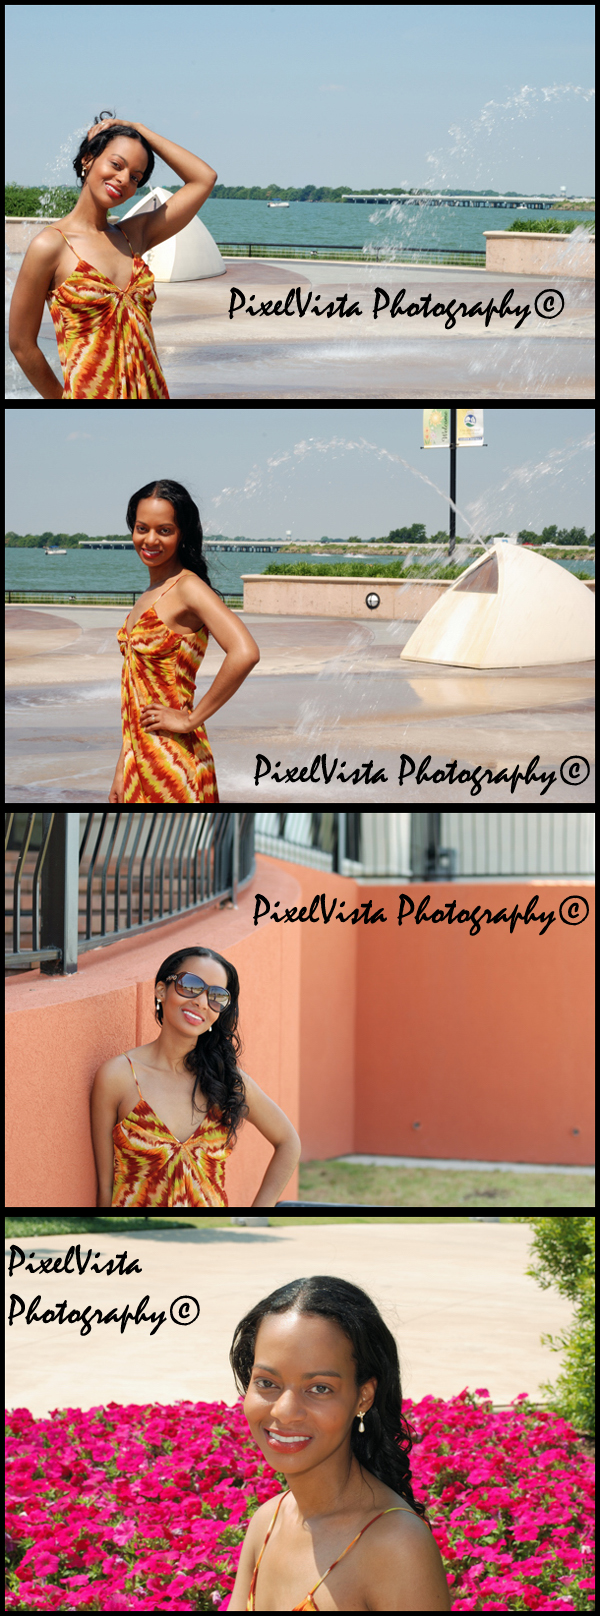 Male and Female model photo shoot of PixelVista Photography and SiriusLeigh